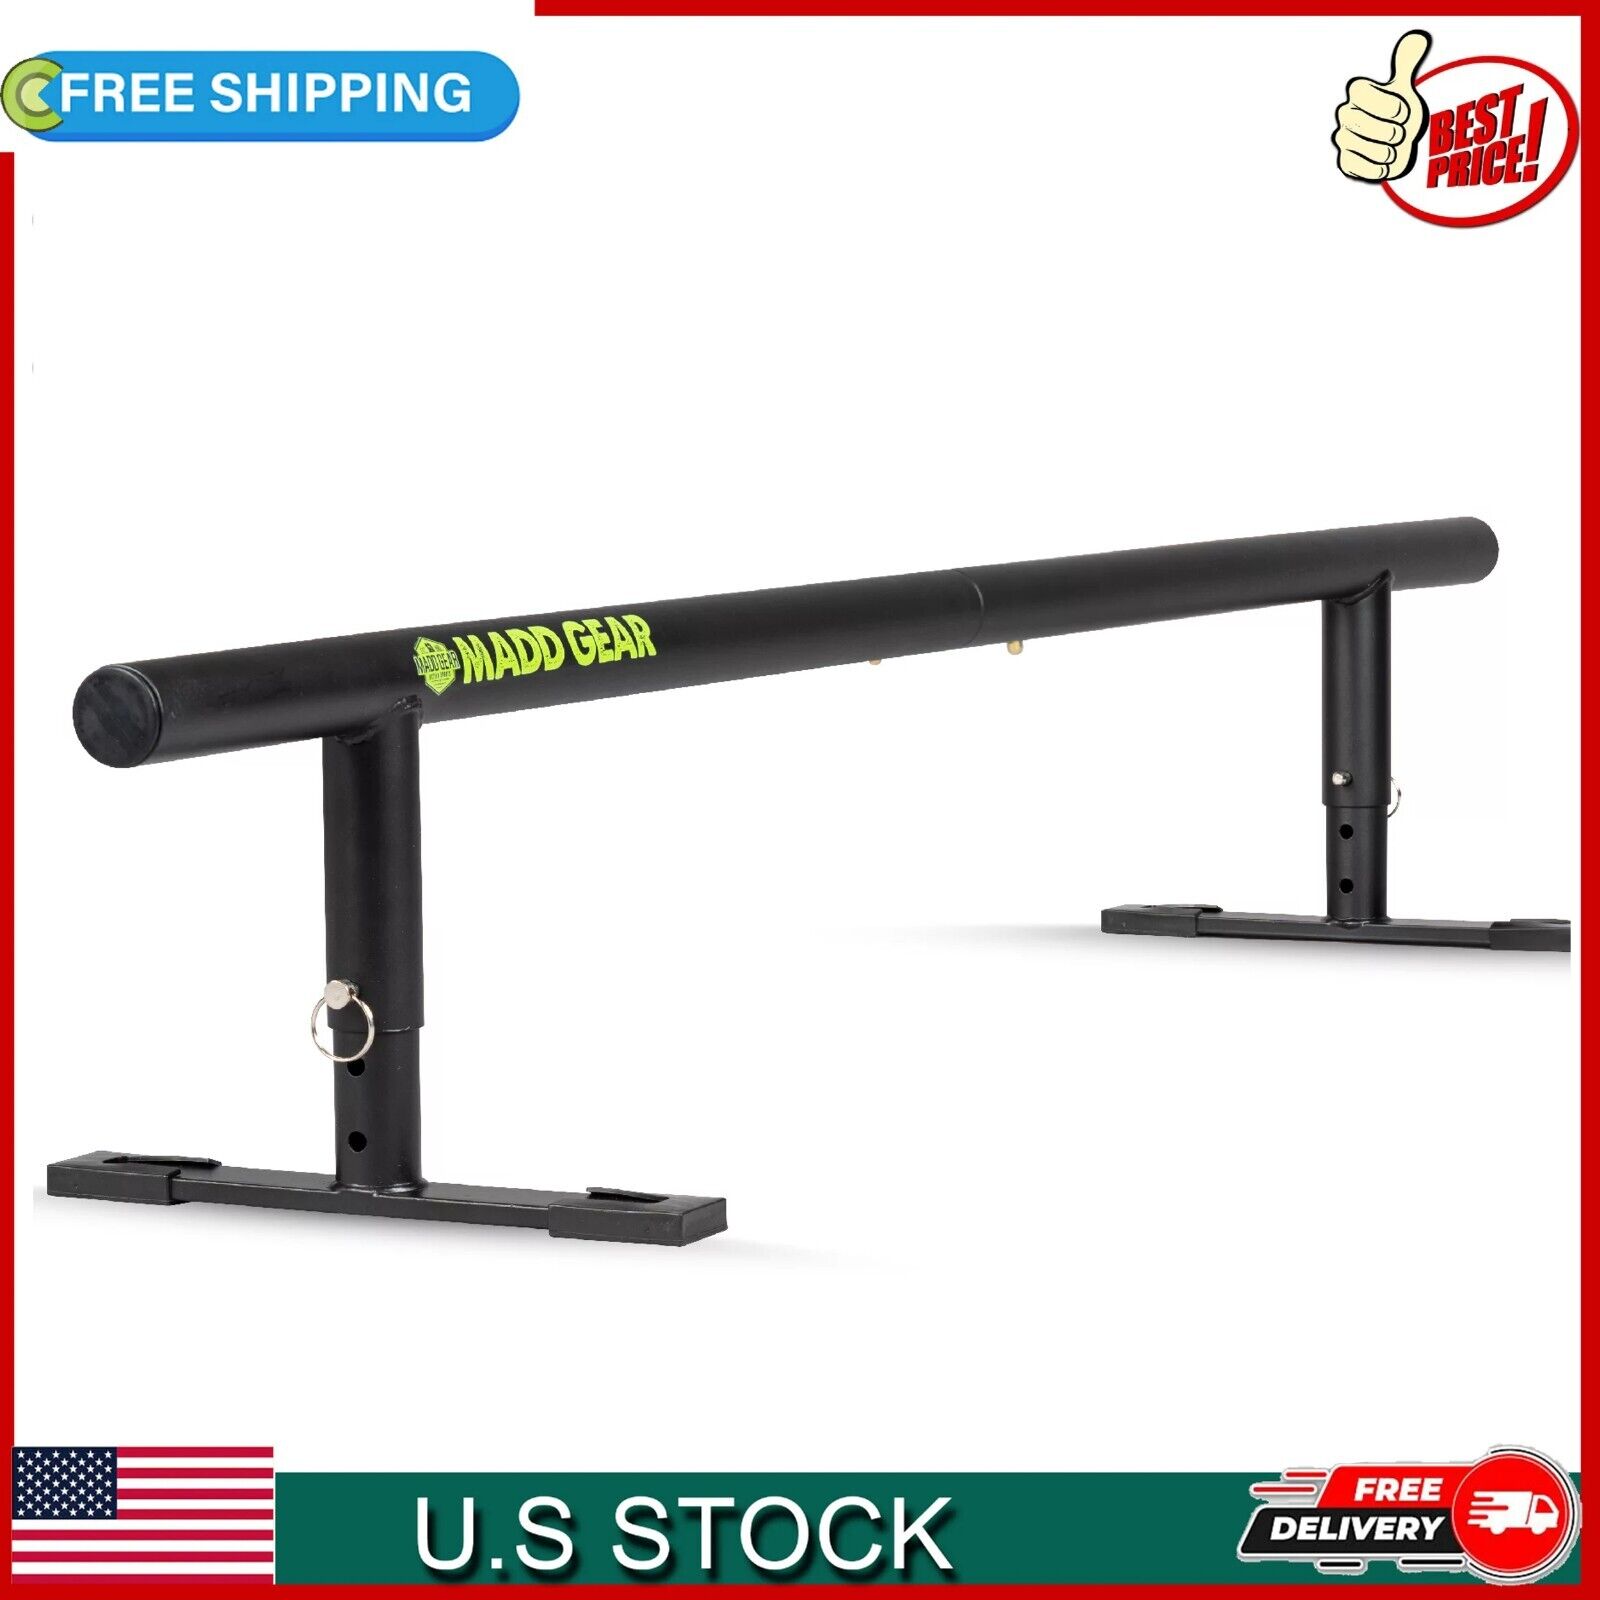 Skateboard Grind Rail Works For Scooters And Bikes 55in 3-step Adjustable Height